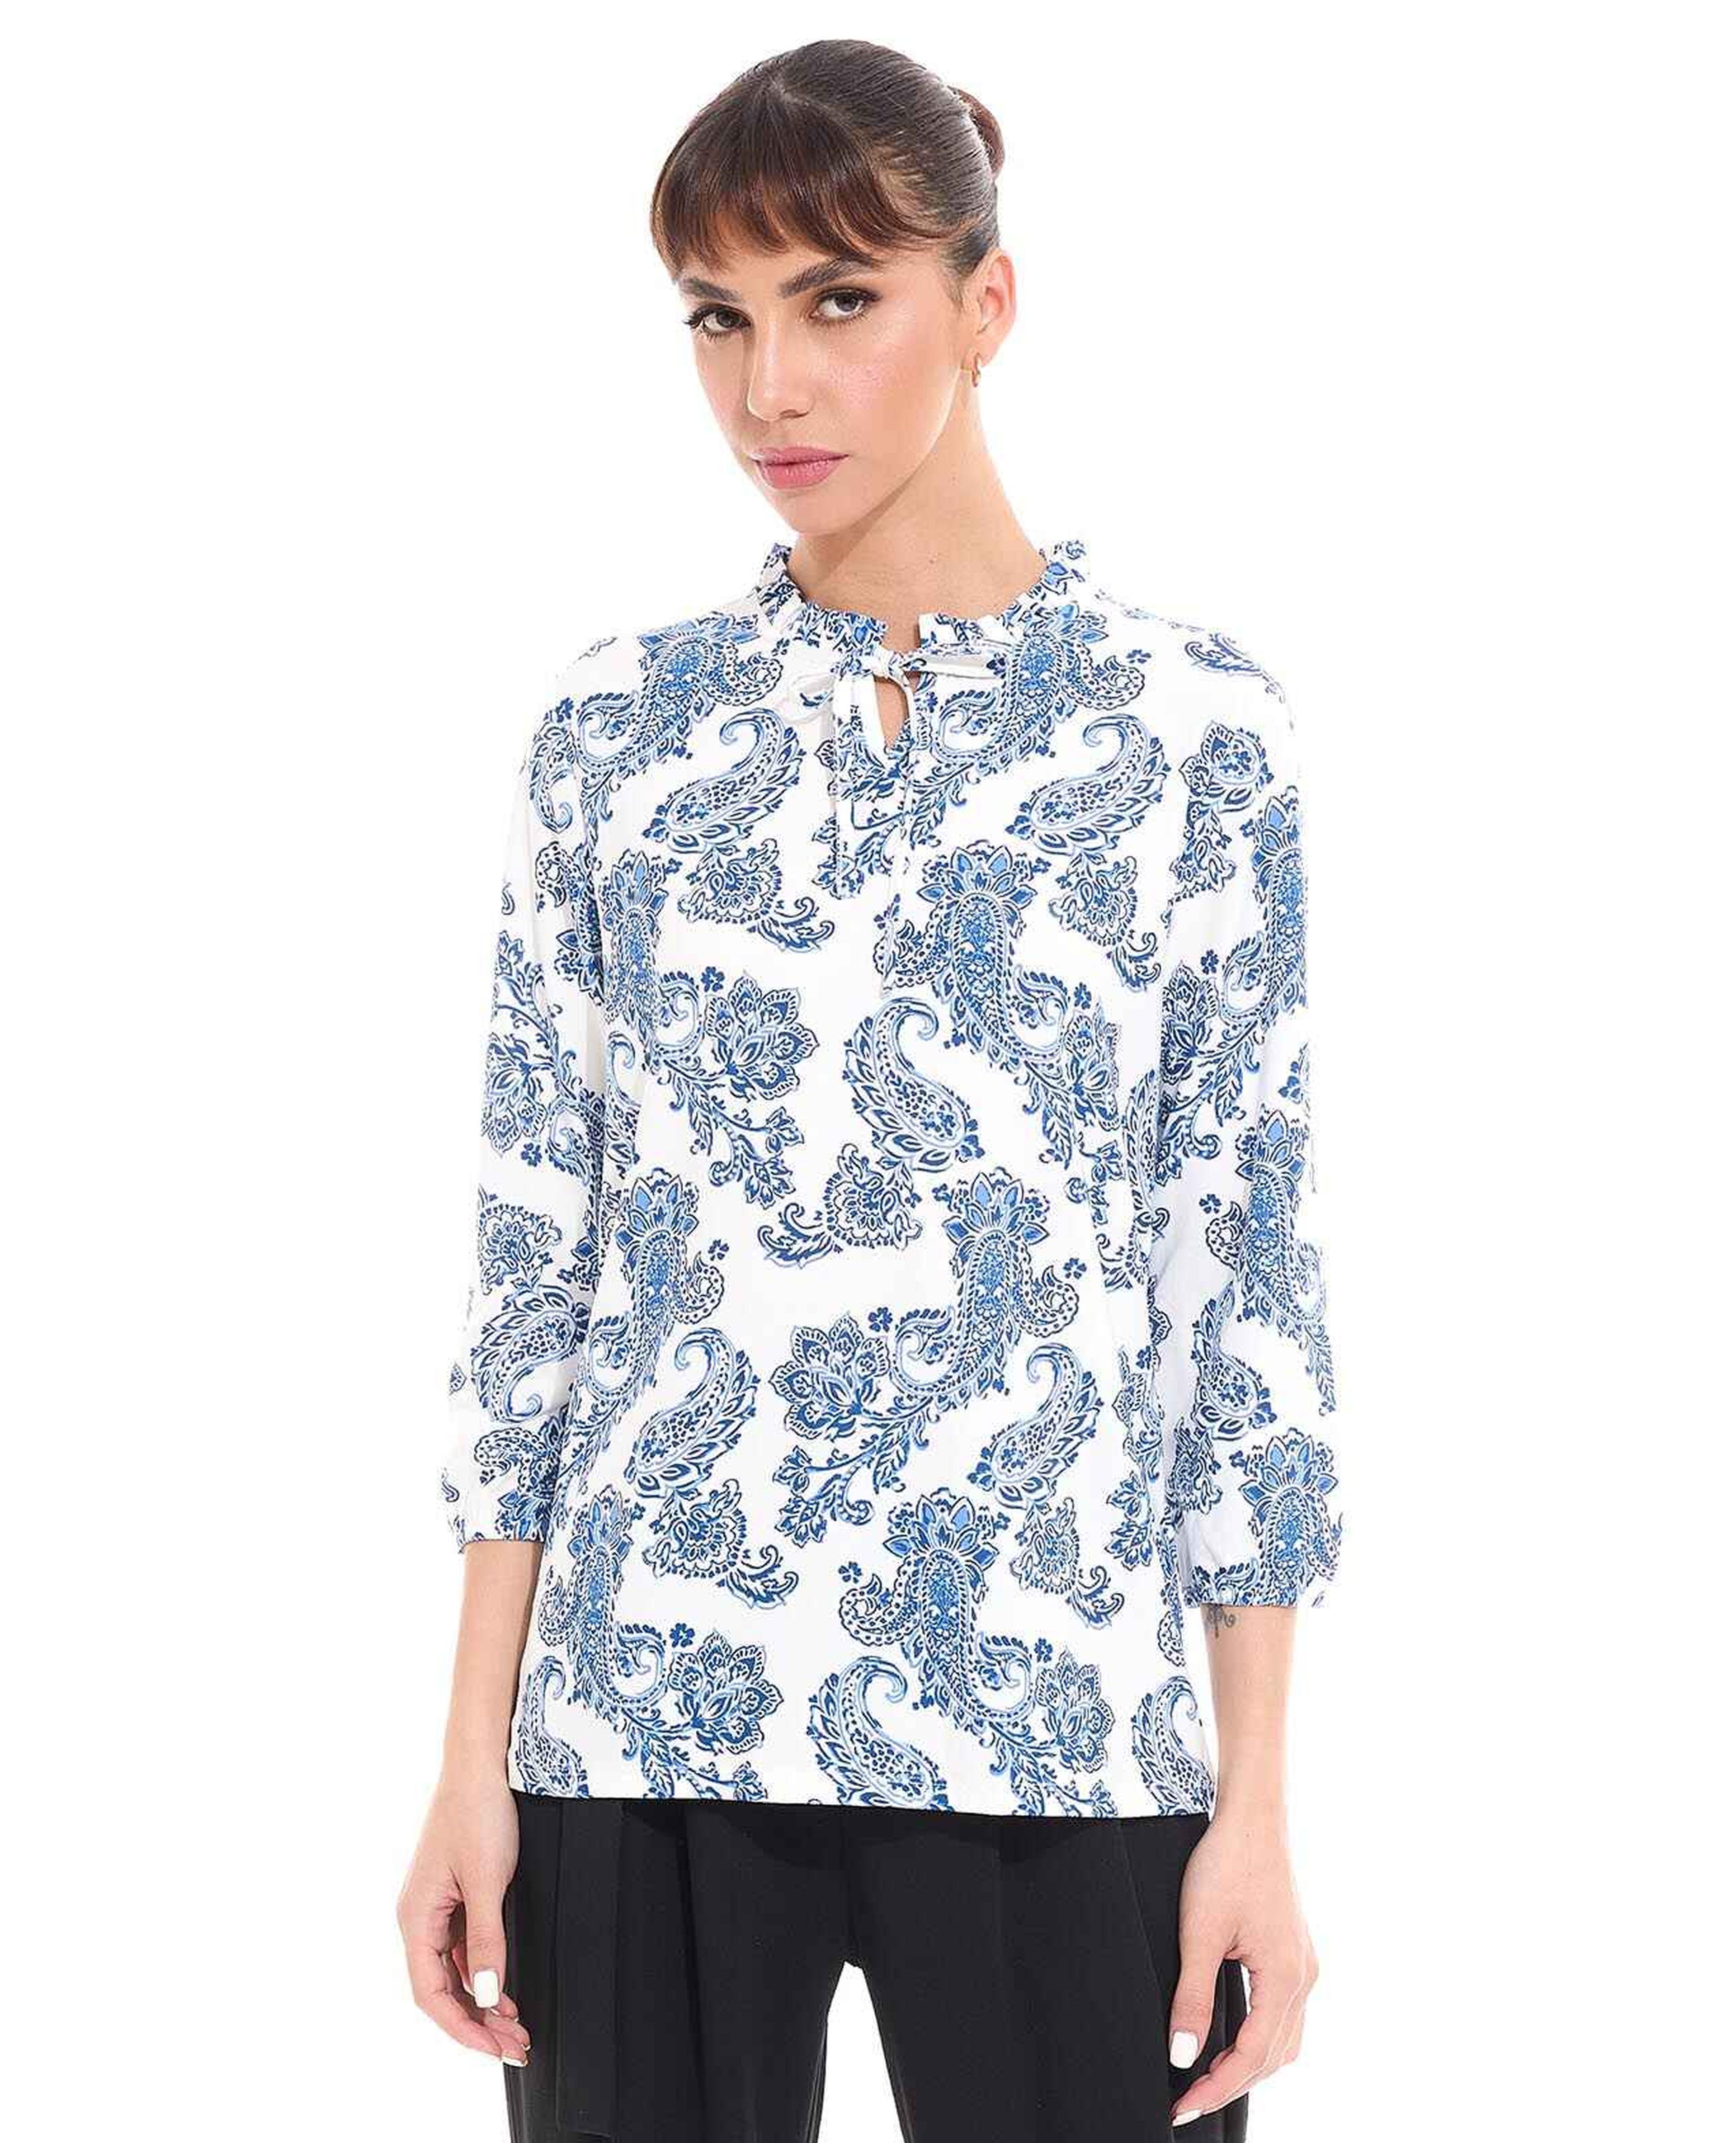 Paisley Print Top with Tie-Up Neck and 3/4 Sleeves